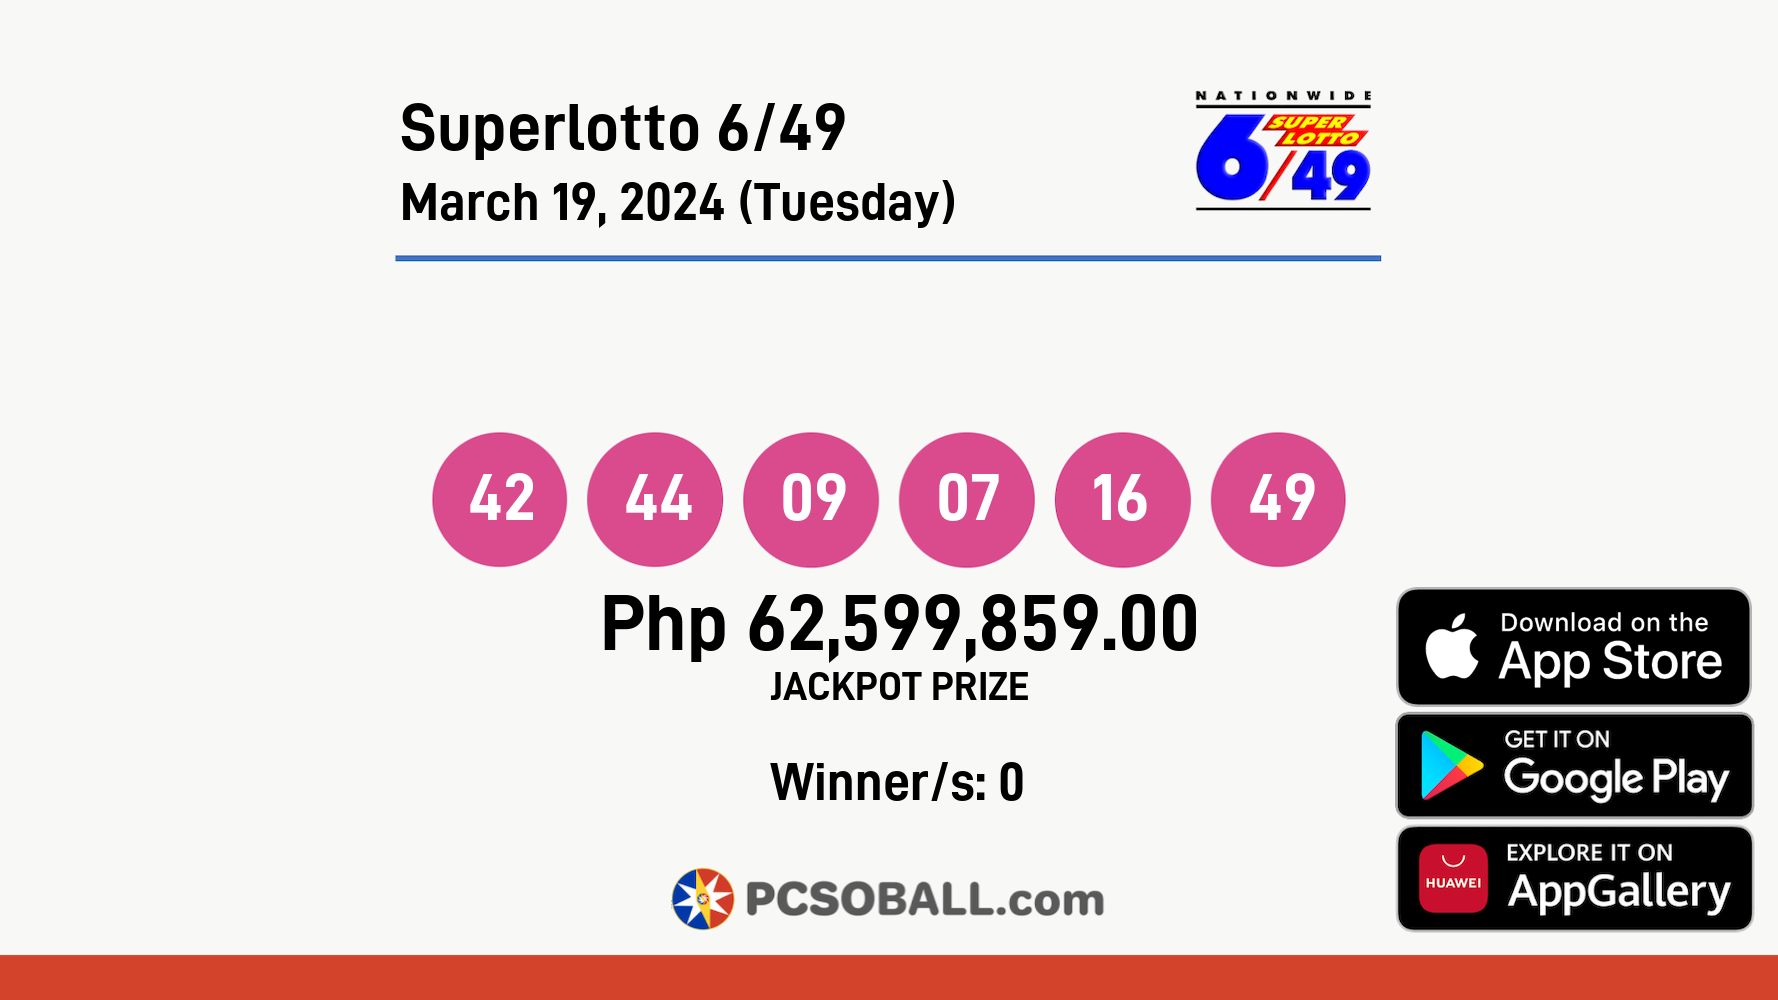 Superlotto 6/49 March 19, 2024 (Tuesday) Result